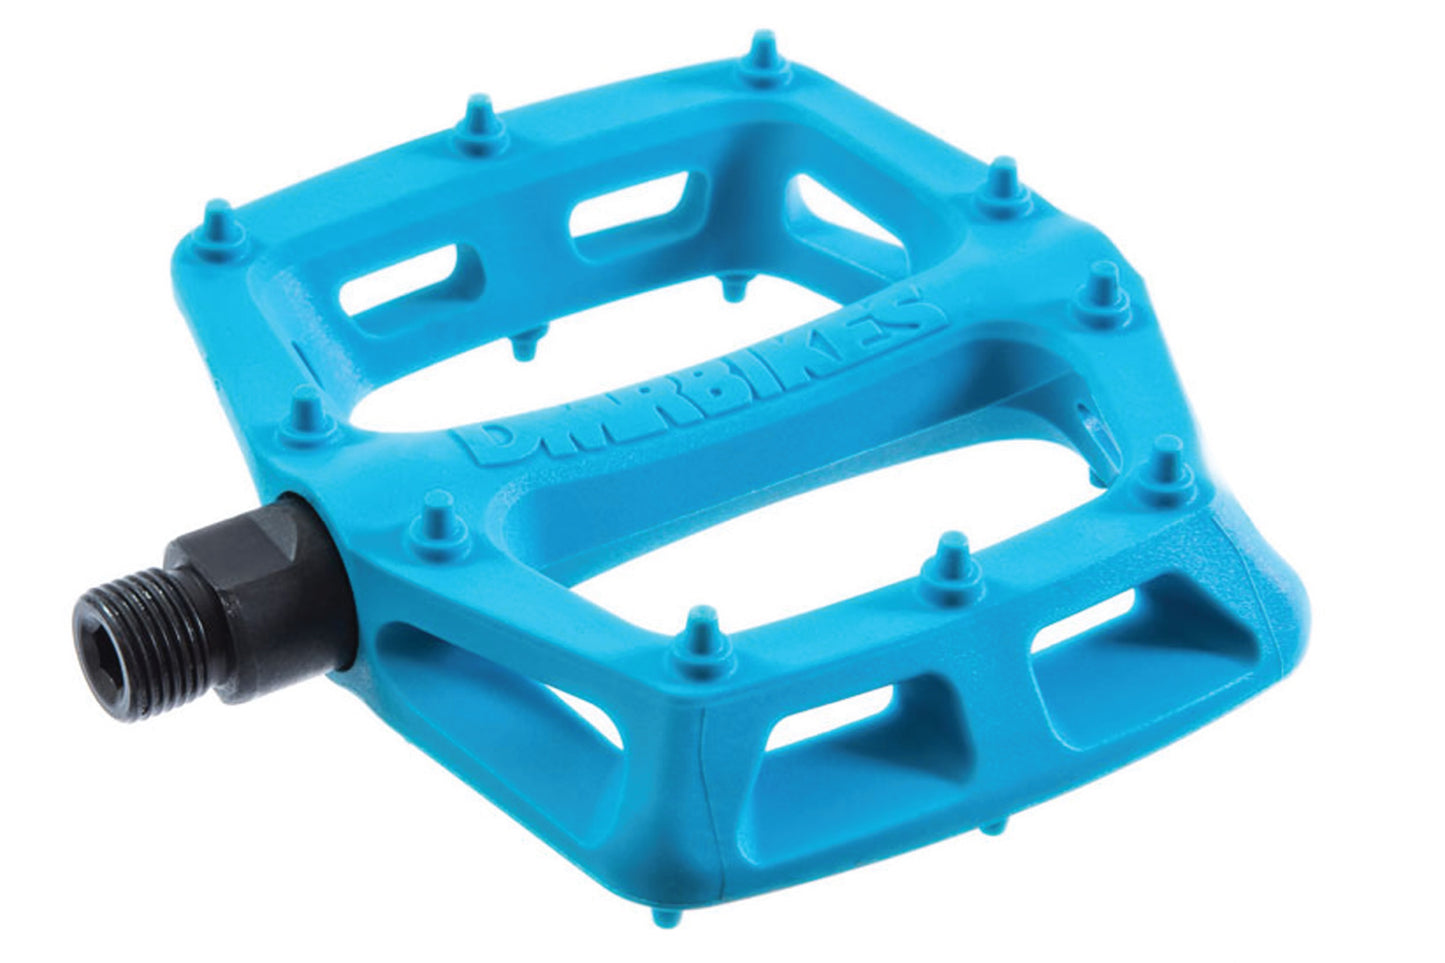 DMR V6 FLAT PEDALS - FISHTAIL CYCLERY